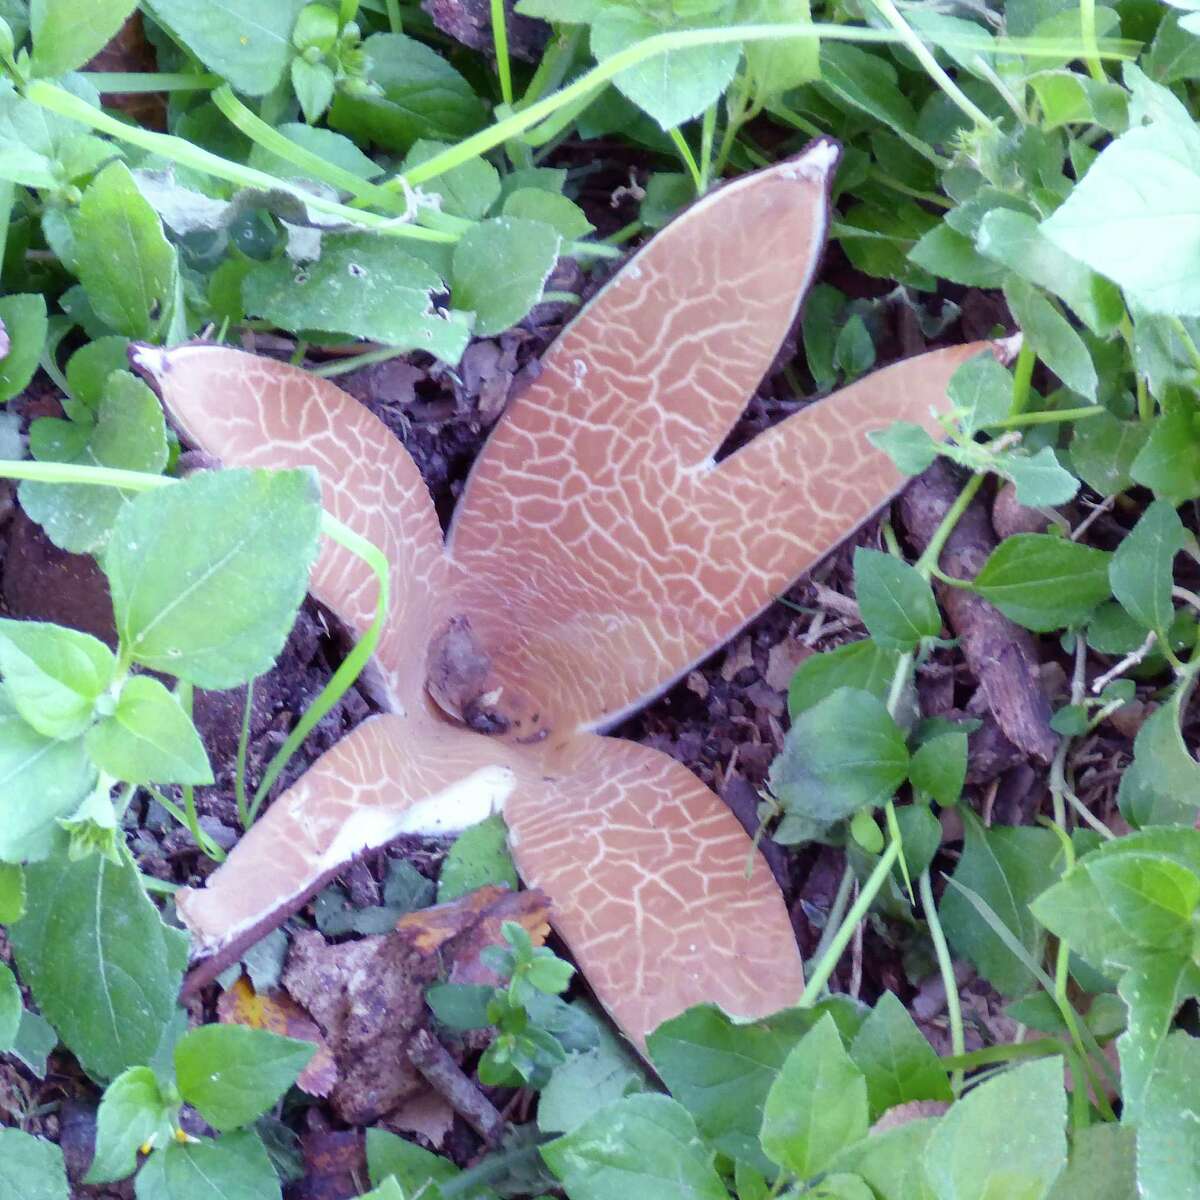 Readers have reported several new sightings of this rare fungus, the devil's cigar.